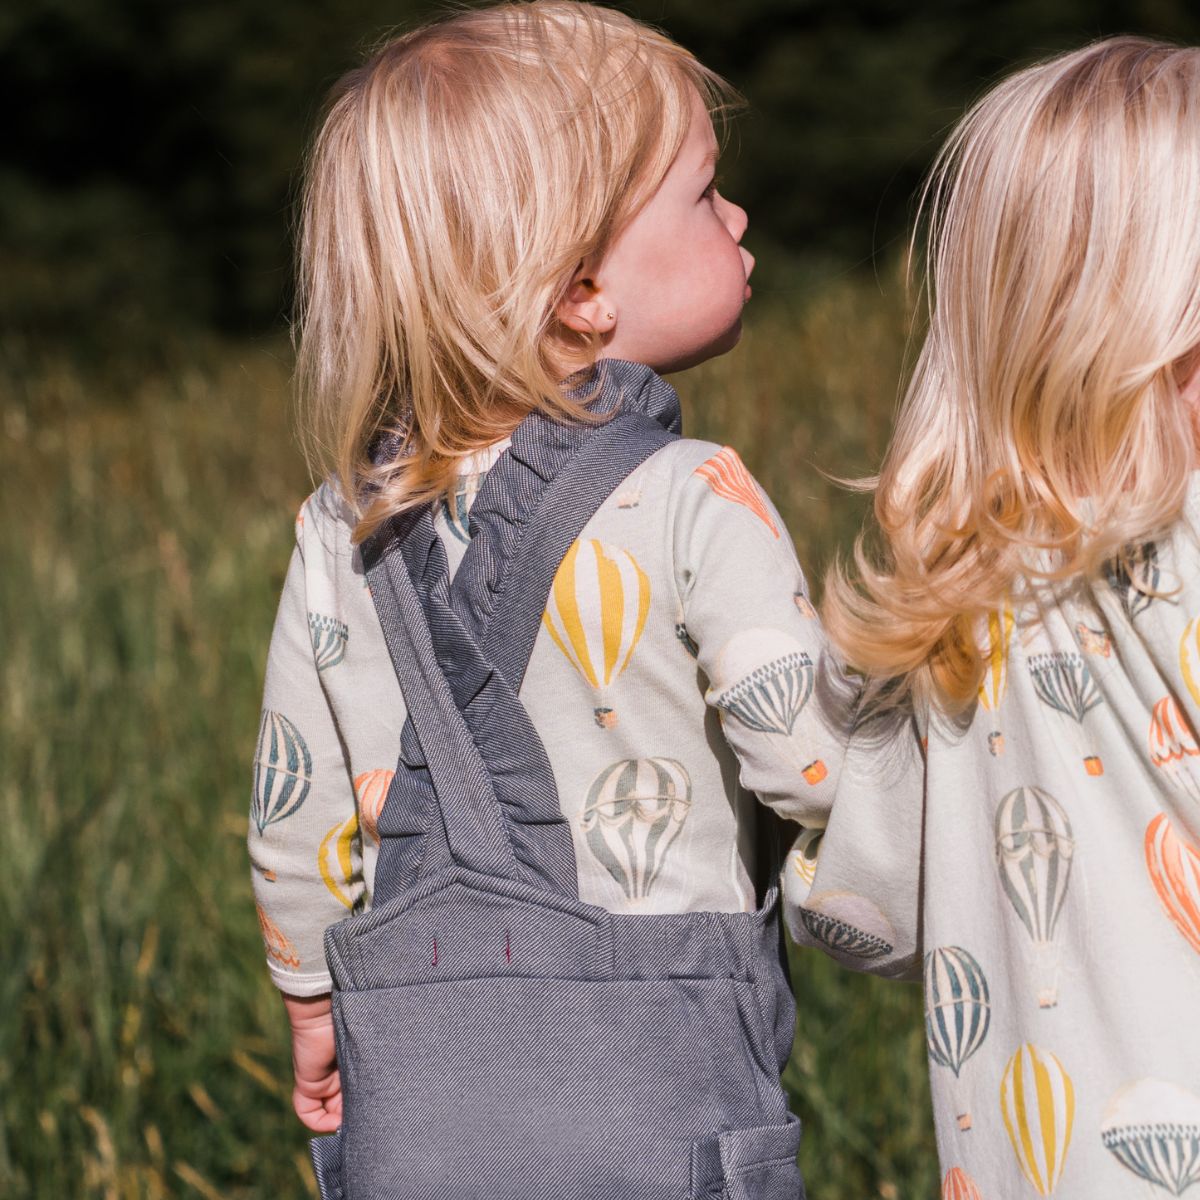 Baby girl holding hands with her sister and looking up into the sky while wearing the Vintage Balloons Organic Long Sleeve One Piece and Denim Ruffle Overalls by Milkbarn